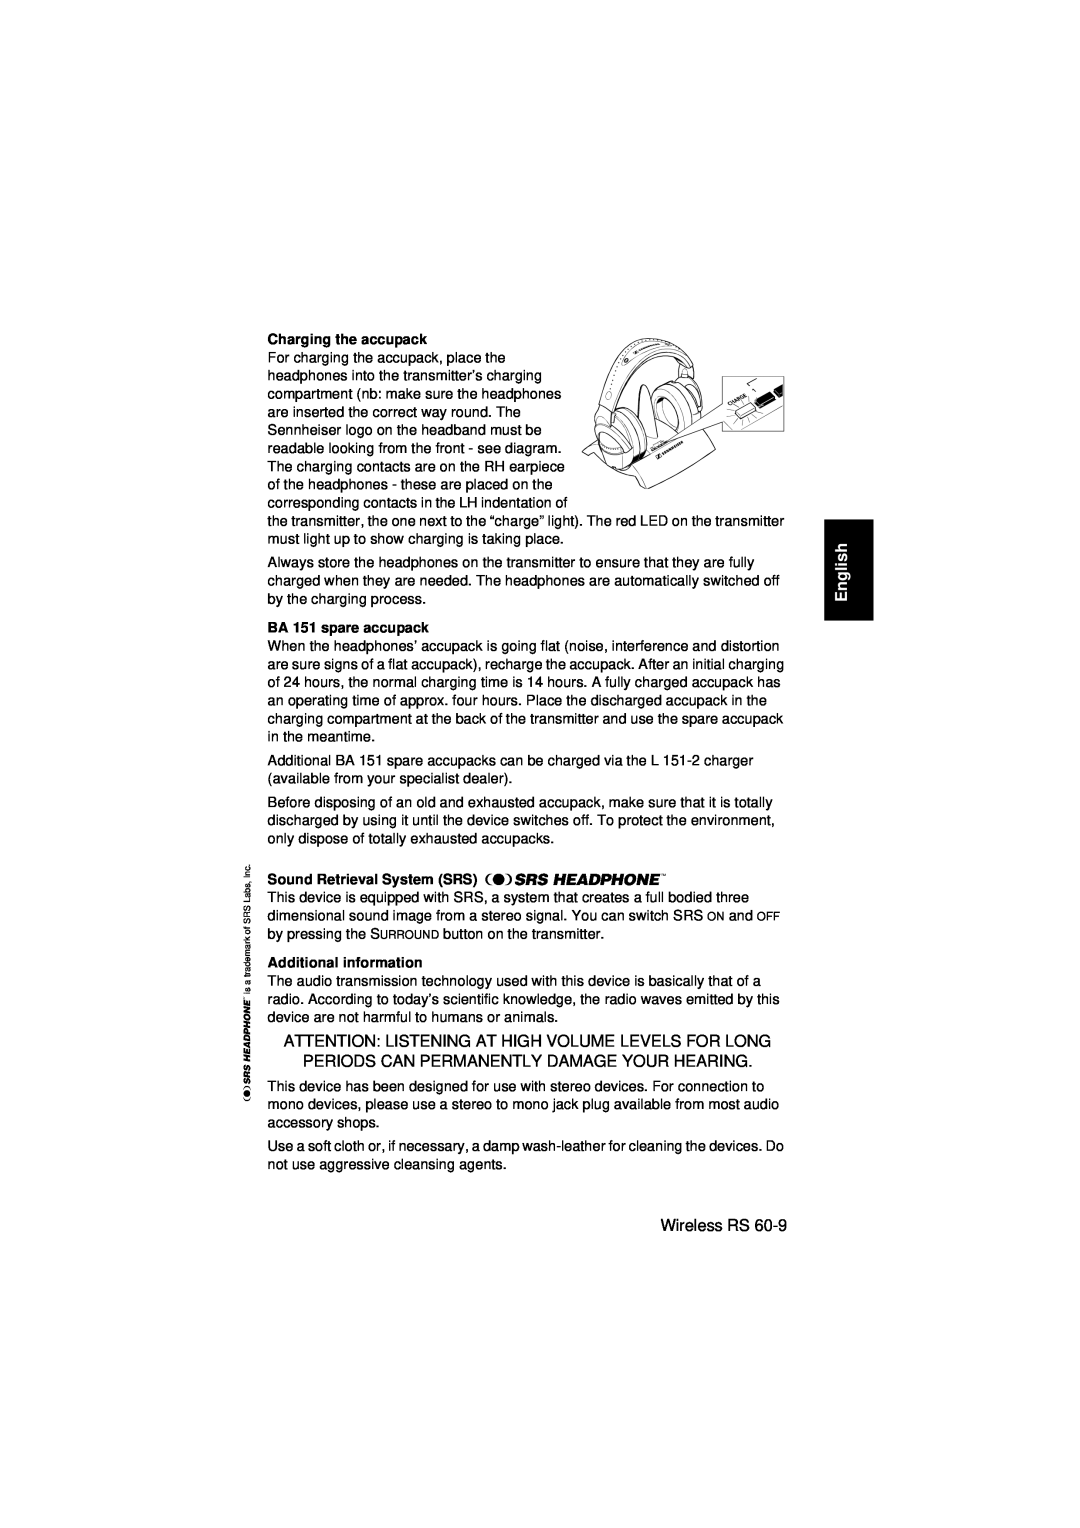 Sennheiser Wireless RS 60 instruction manual Periods Can Permanently Damage Your Hearing, English, BA 151 spare accupack 